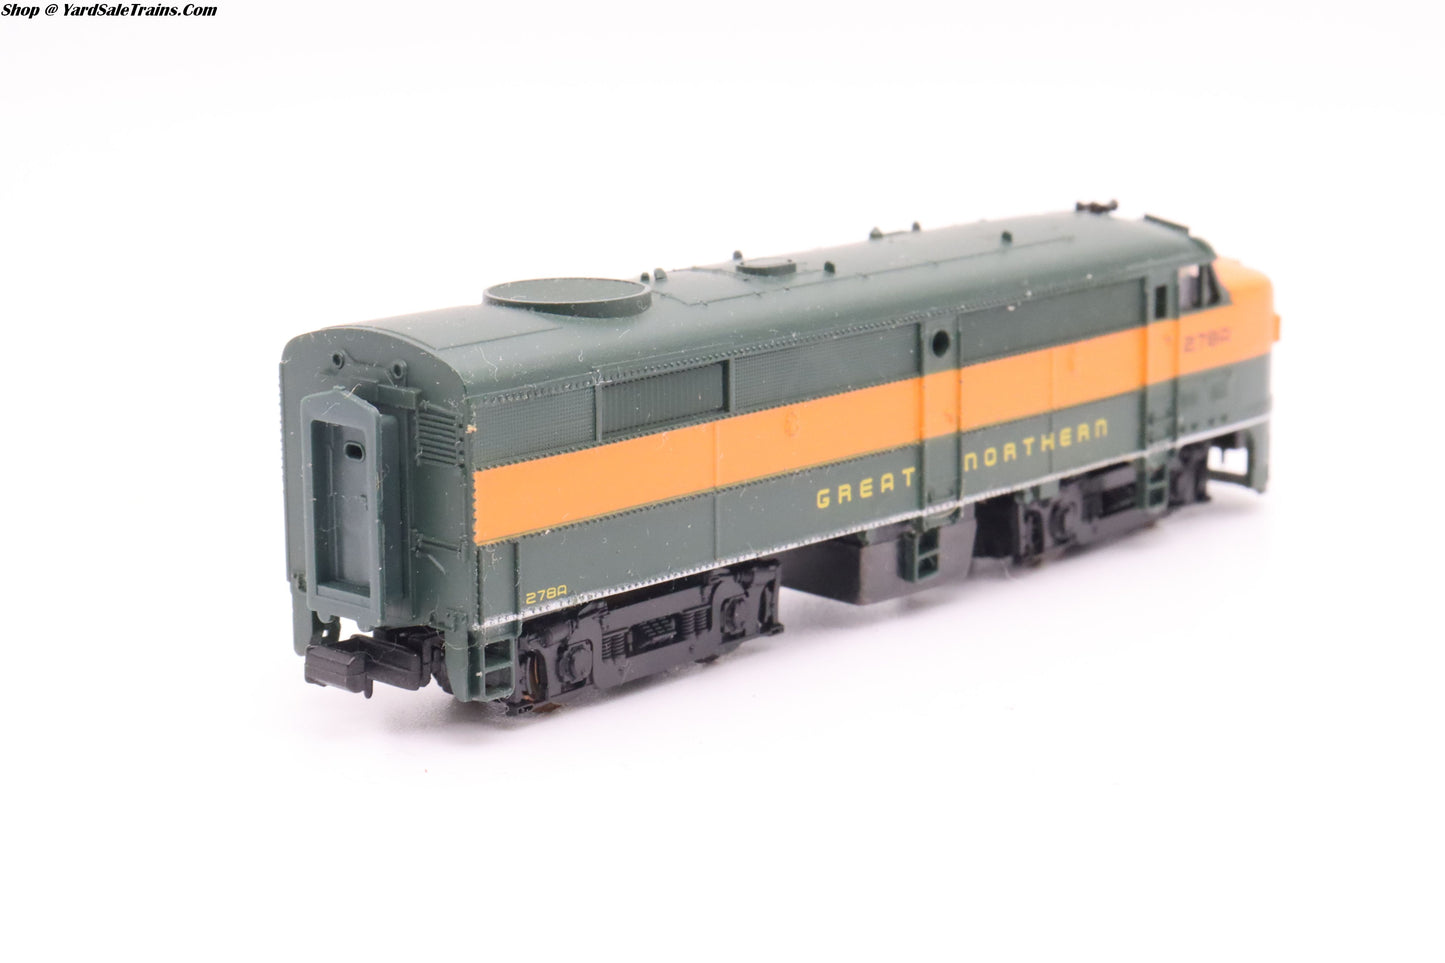 LL-7918 - FA2 Locomotive - Great Northern - GN # 278A - N Scale - Preowned